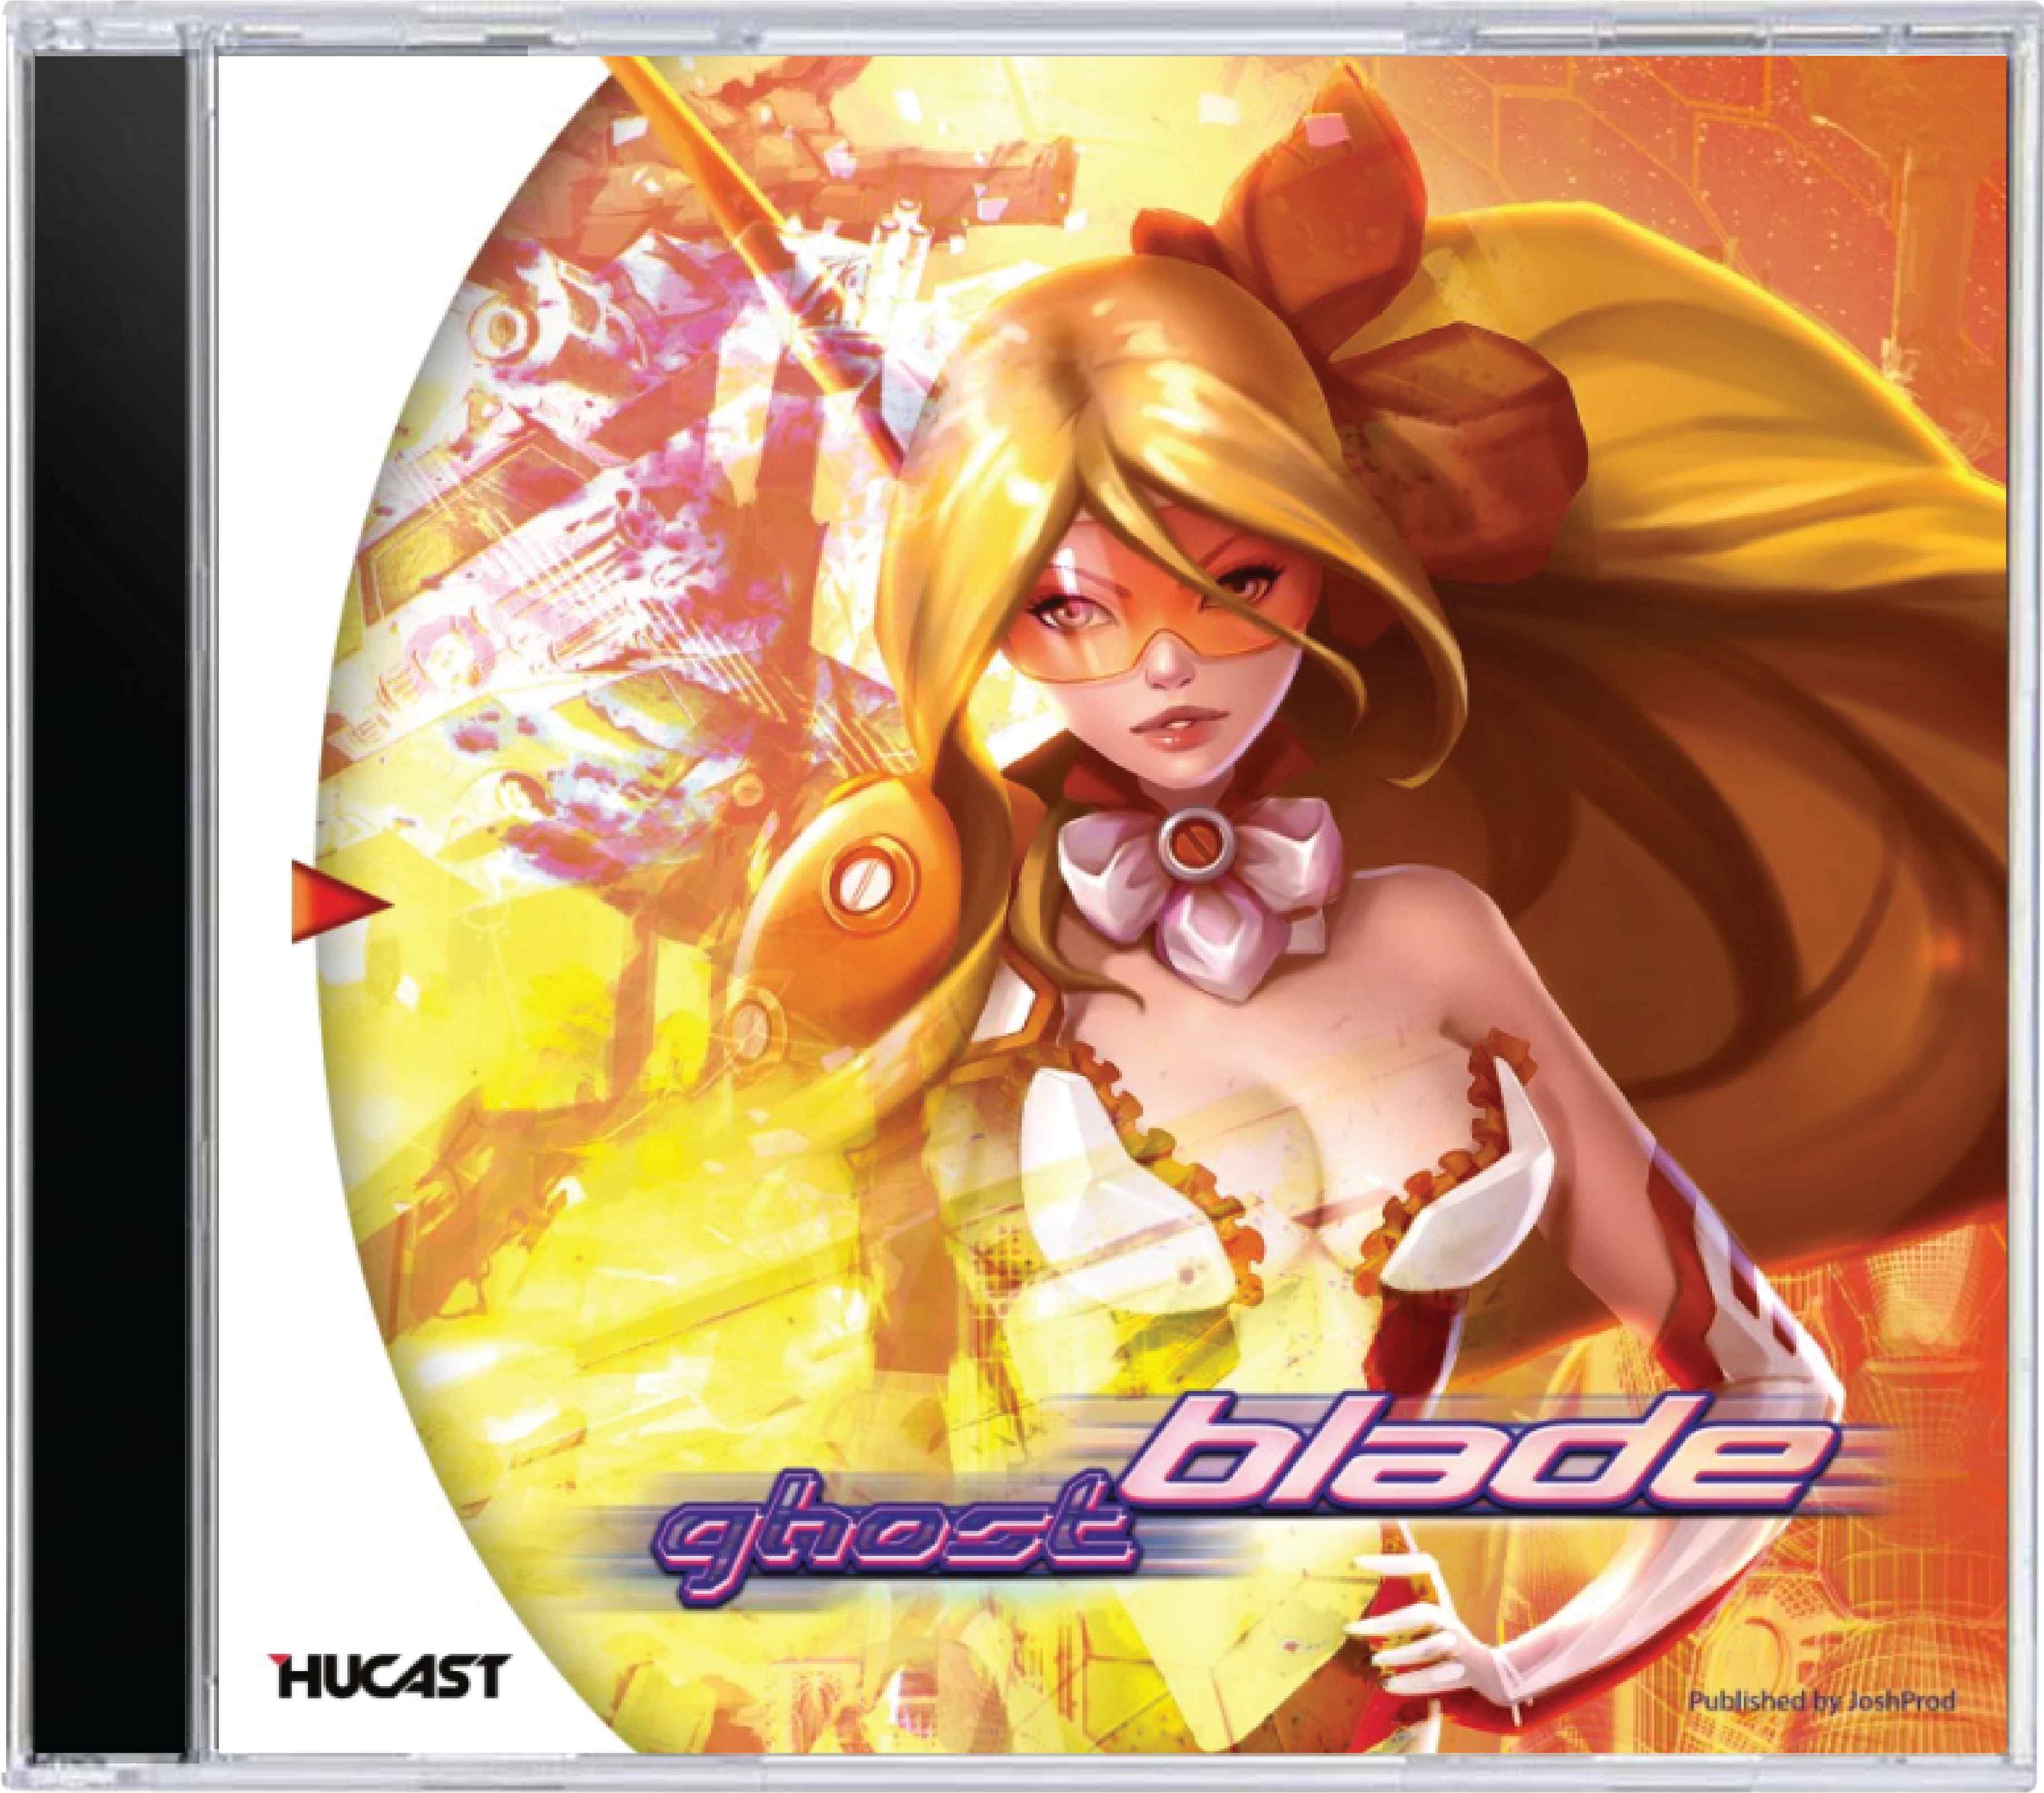 The Ghost Blade Cover Art